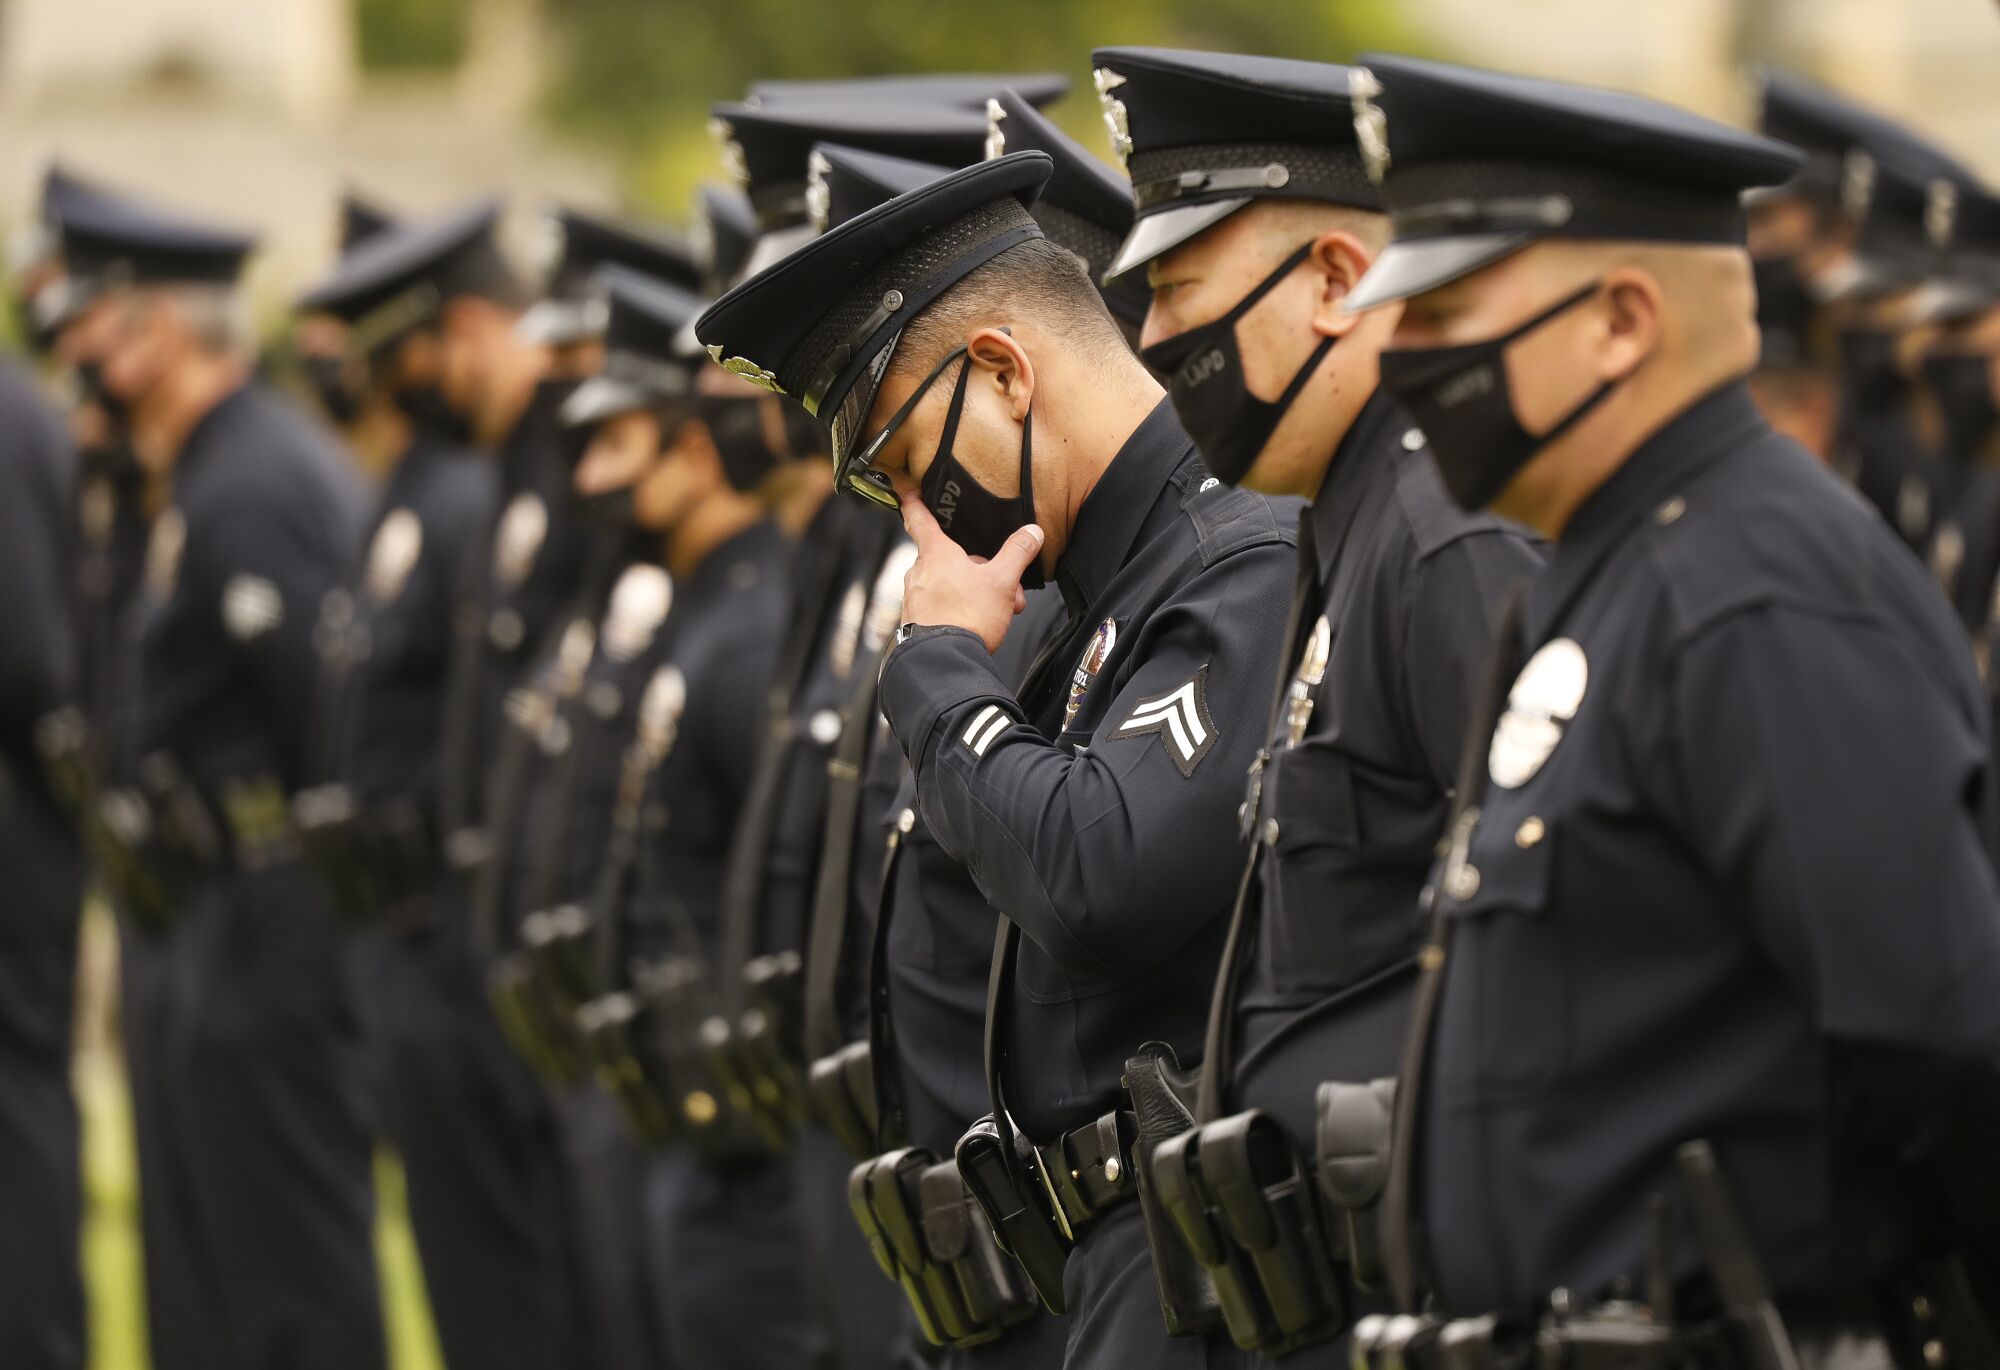 An officer wipes a tear during the service.